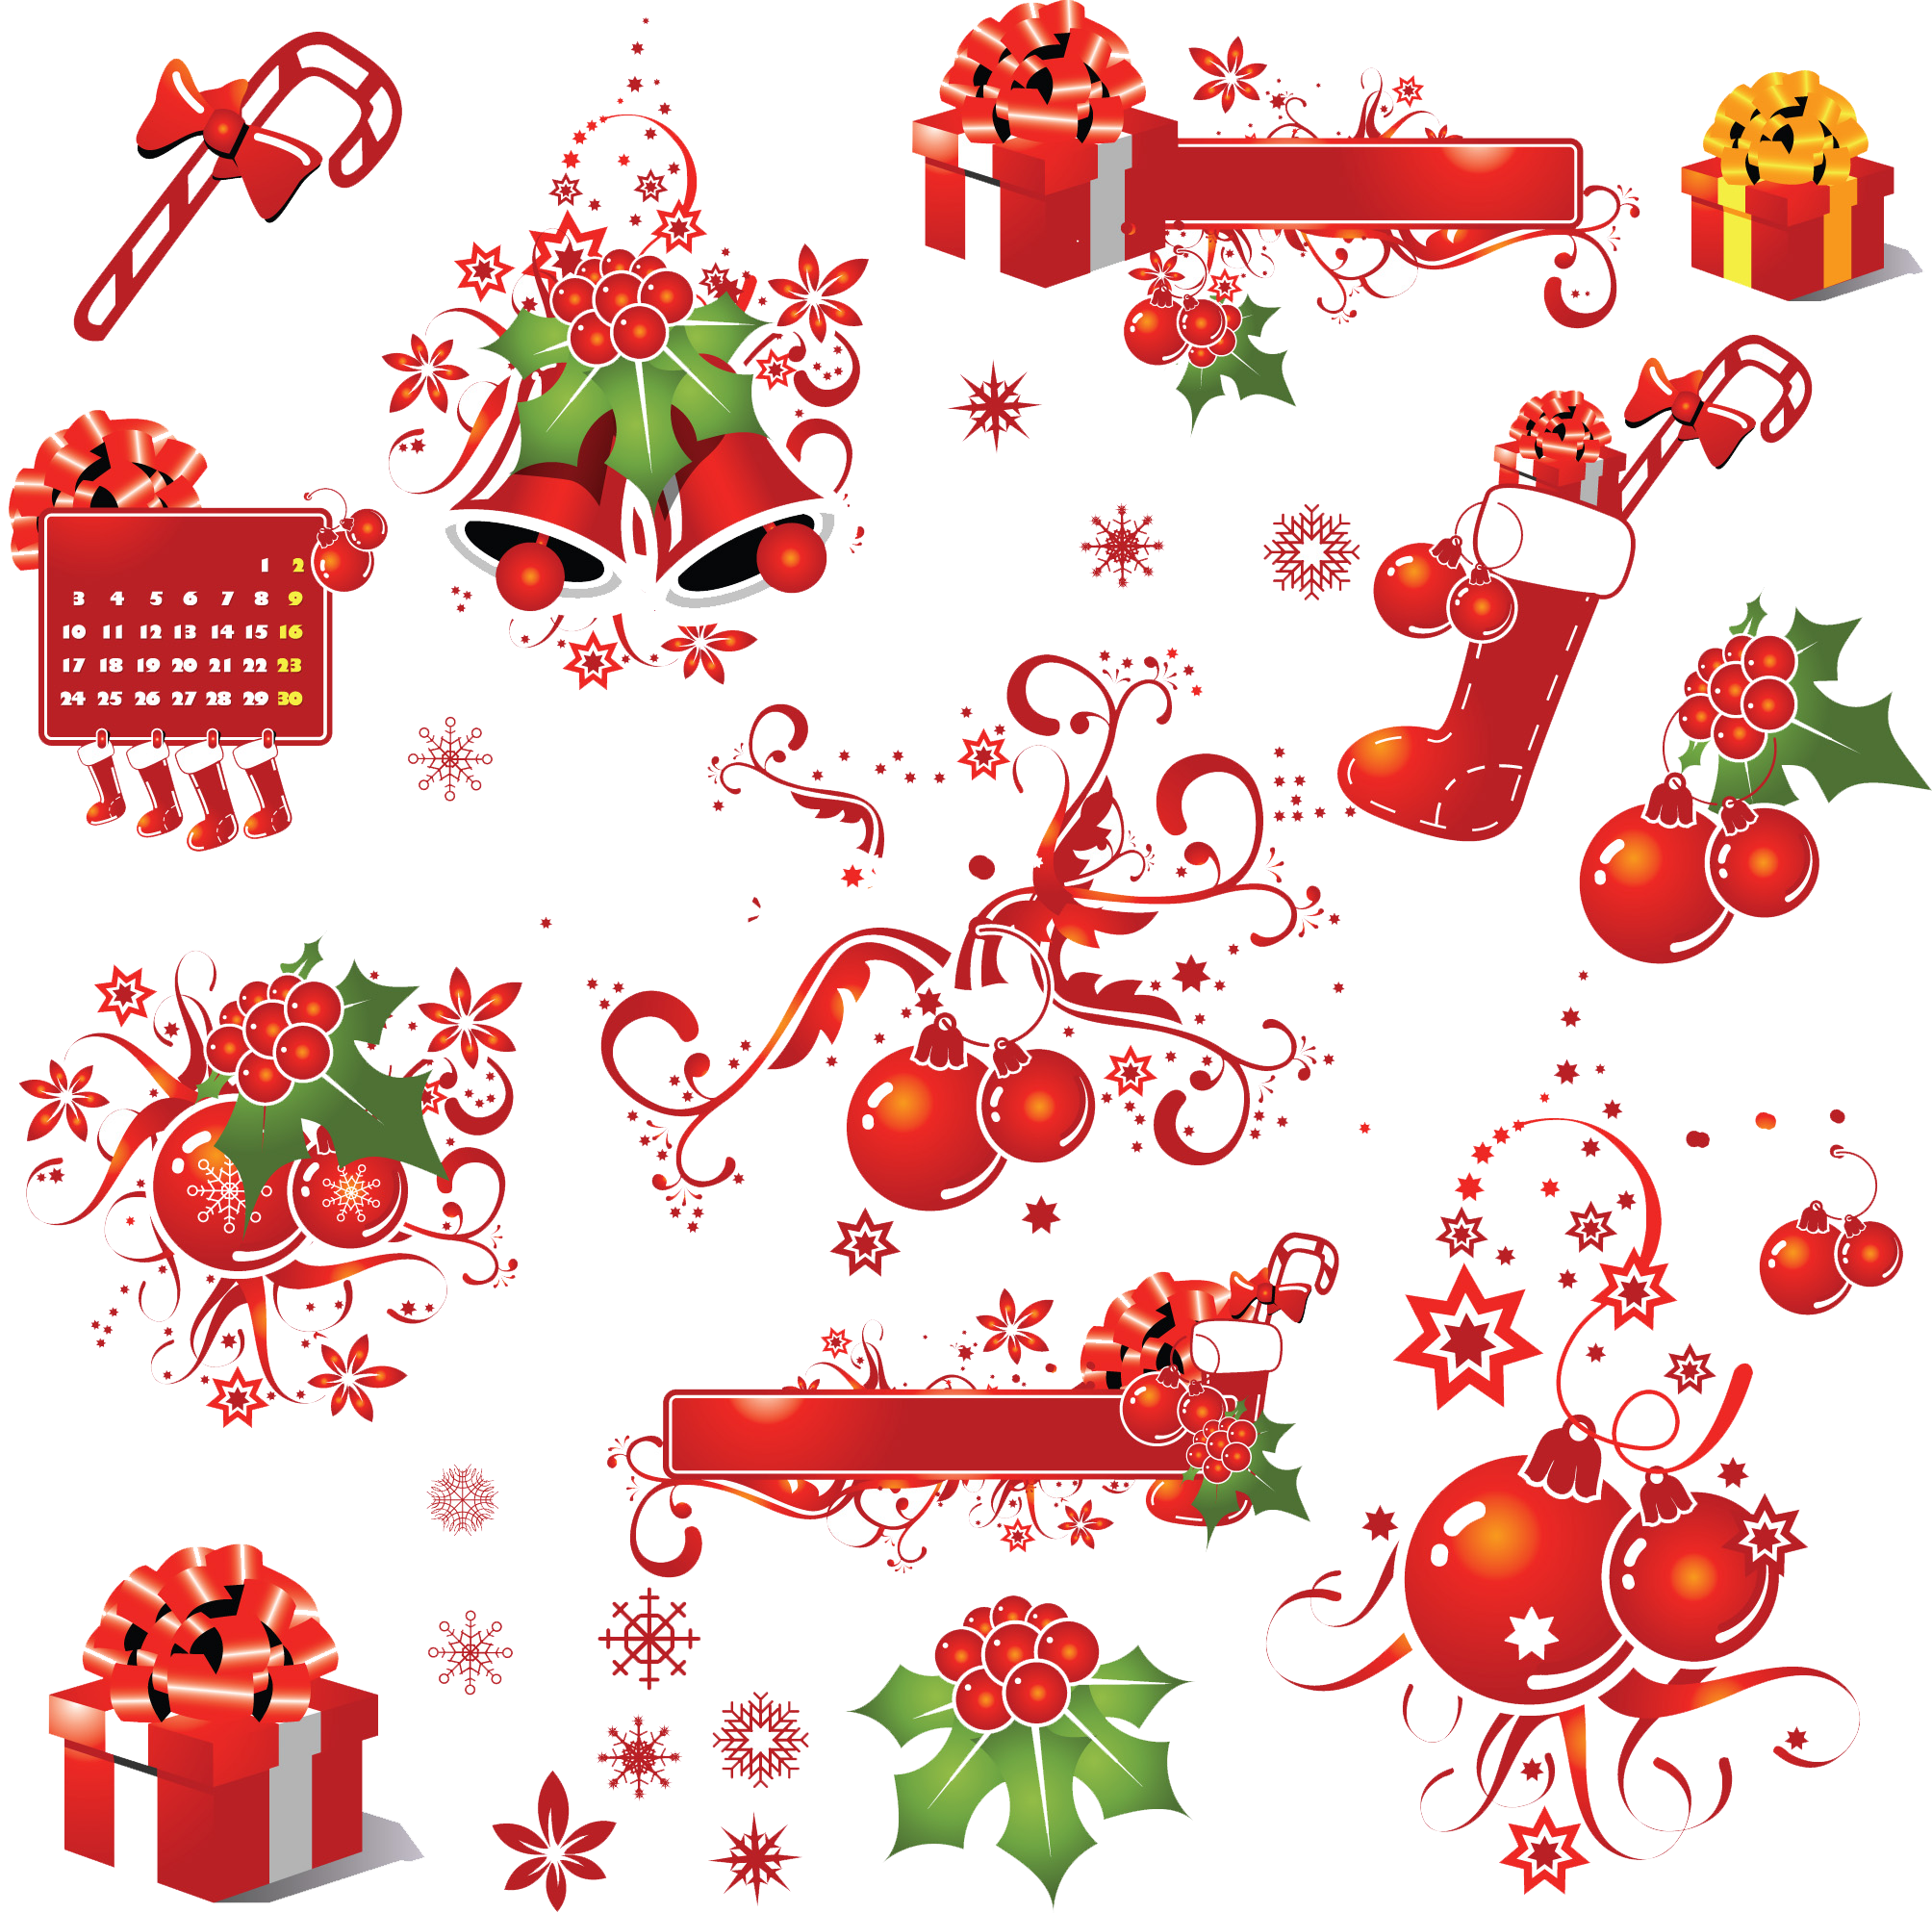 Download PNG image - Christmas Elements PNG Picture 